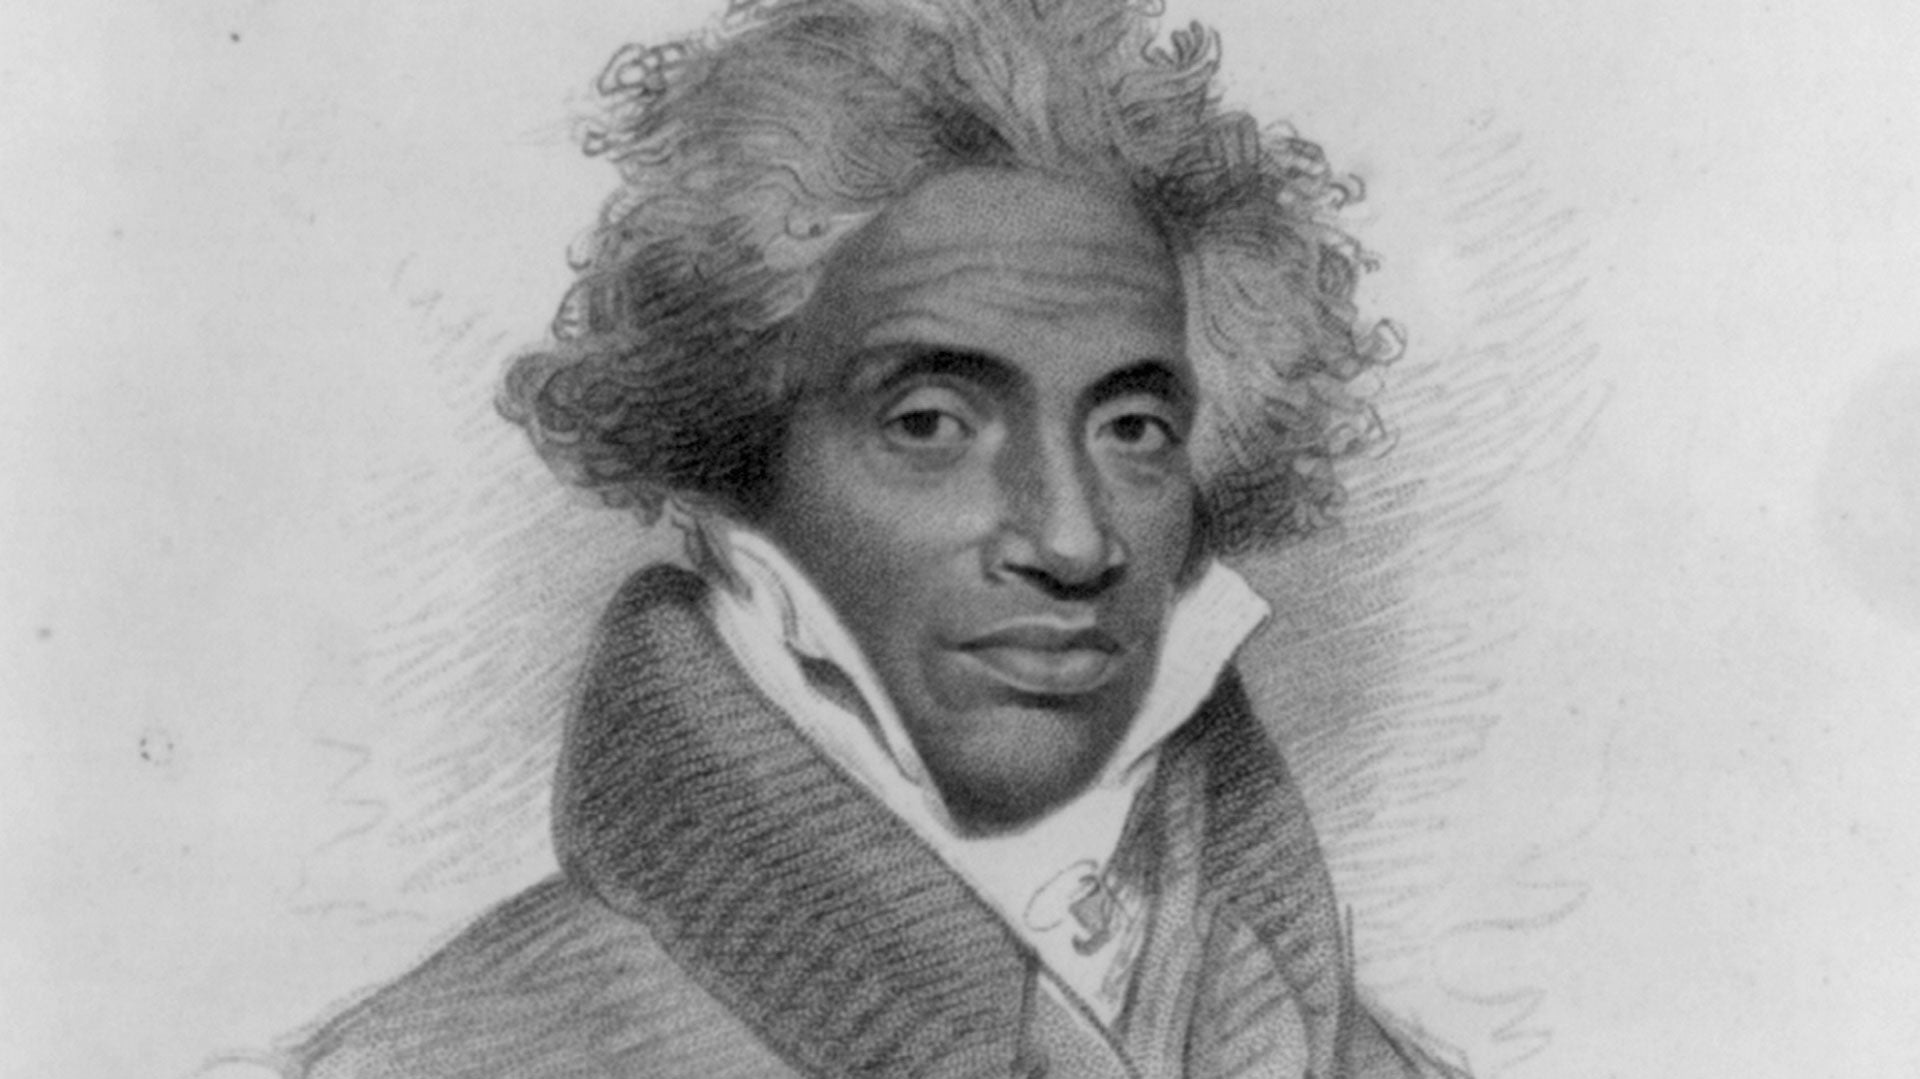 40 Years a Slave: The Extraordinary Tale of an African Prince Stolen from His Kingdom